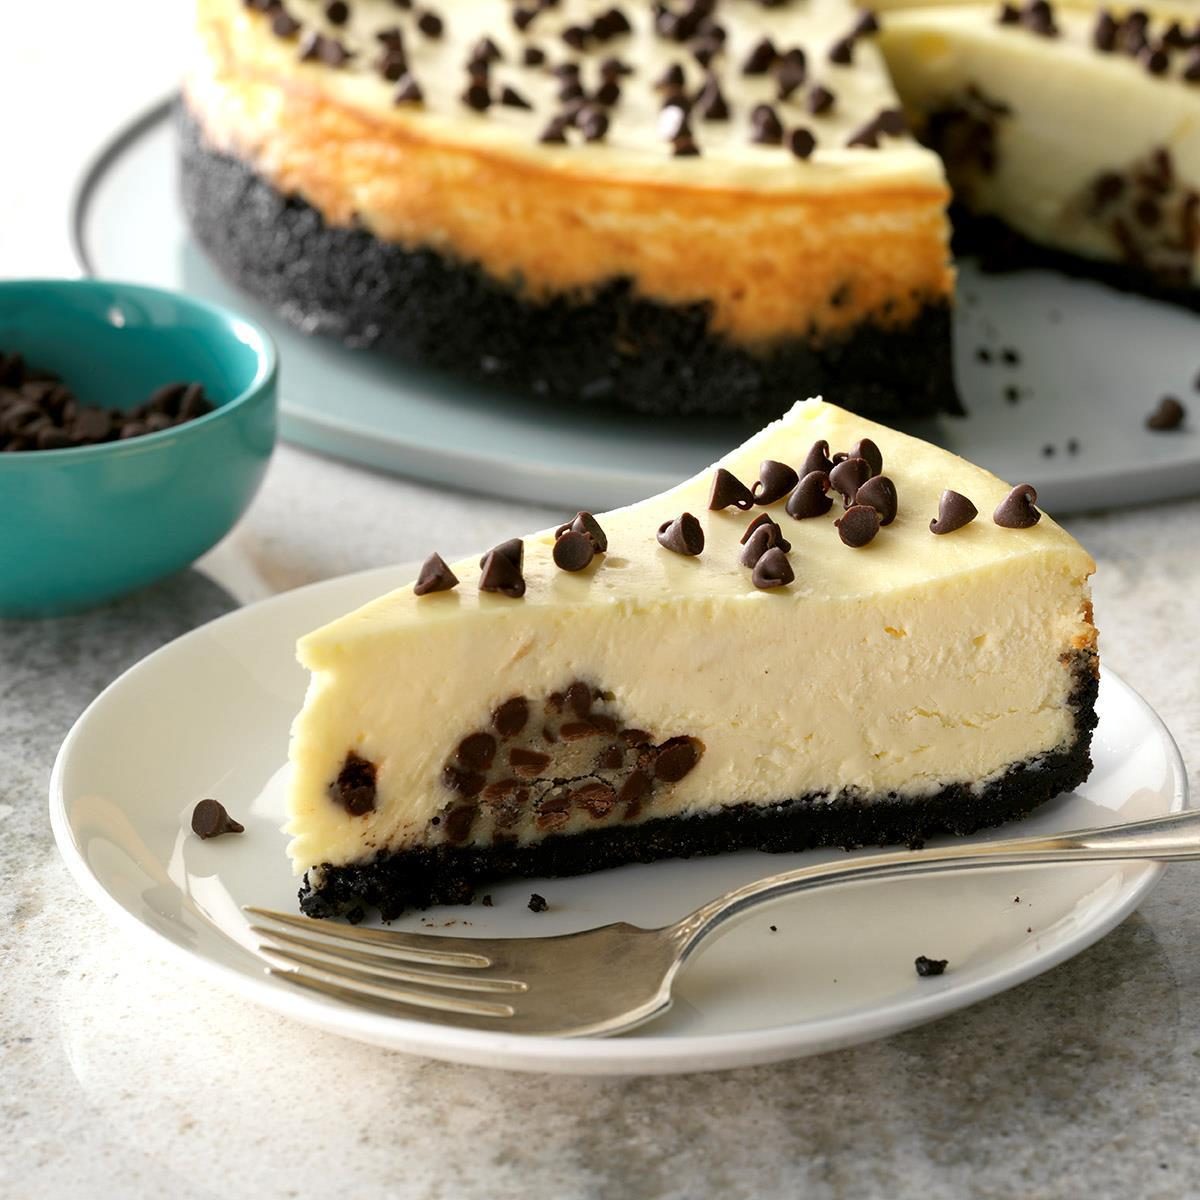 Chocolate Chip Cookie Dough Cheesecake Exps Chmz19 9562 C10 25 10b 6